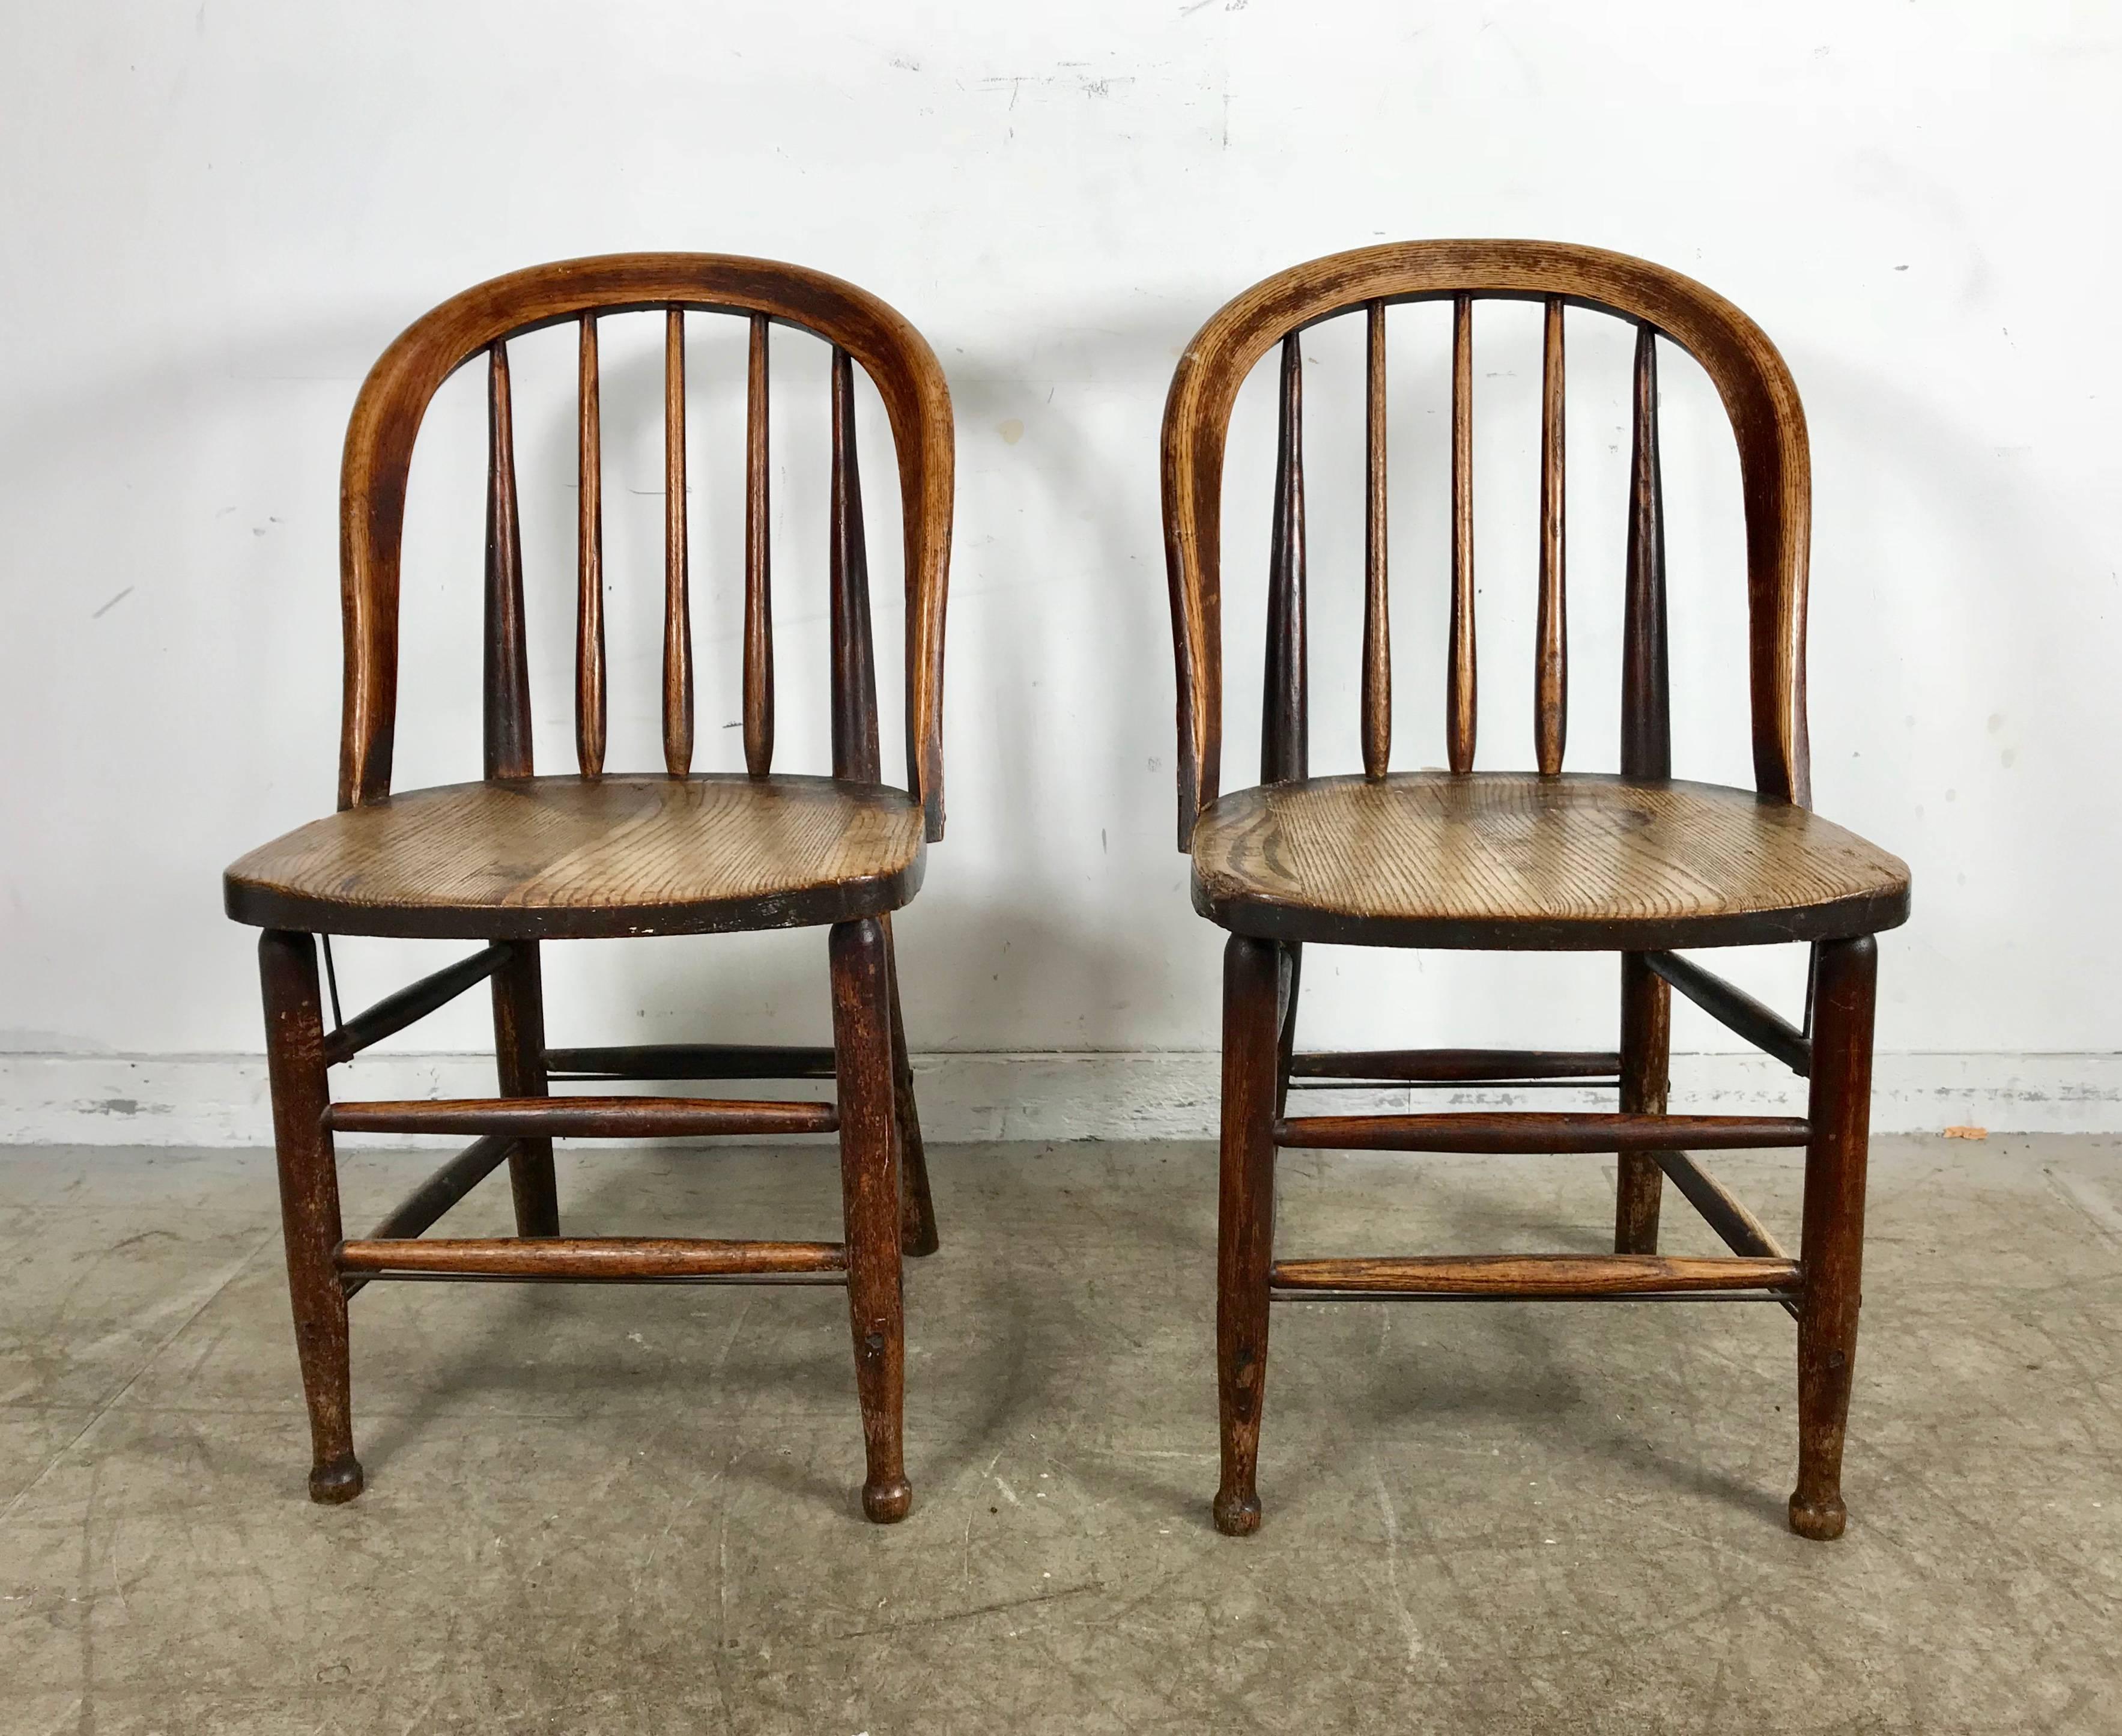 Pair of early oak antique industrial side chairs by Heywood Wakefield, solid oak construction, reinforced metal rod detailing, extremely comfortable. Retain original Heywood Wakefield label.